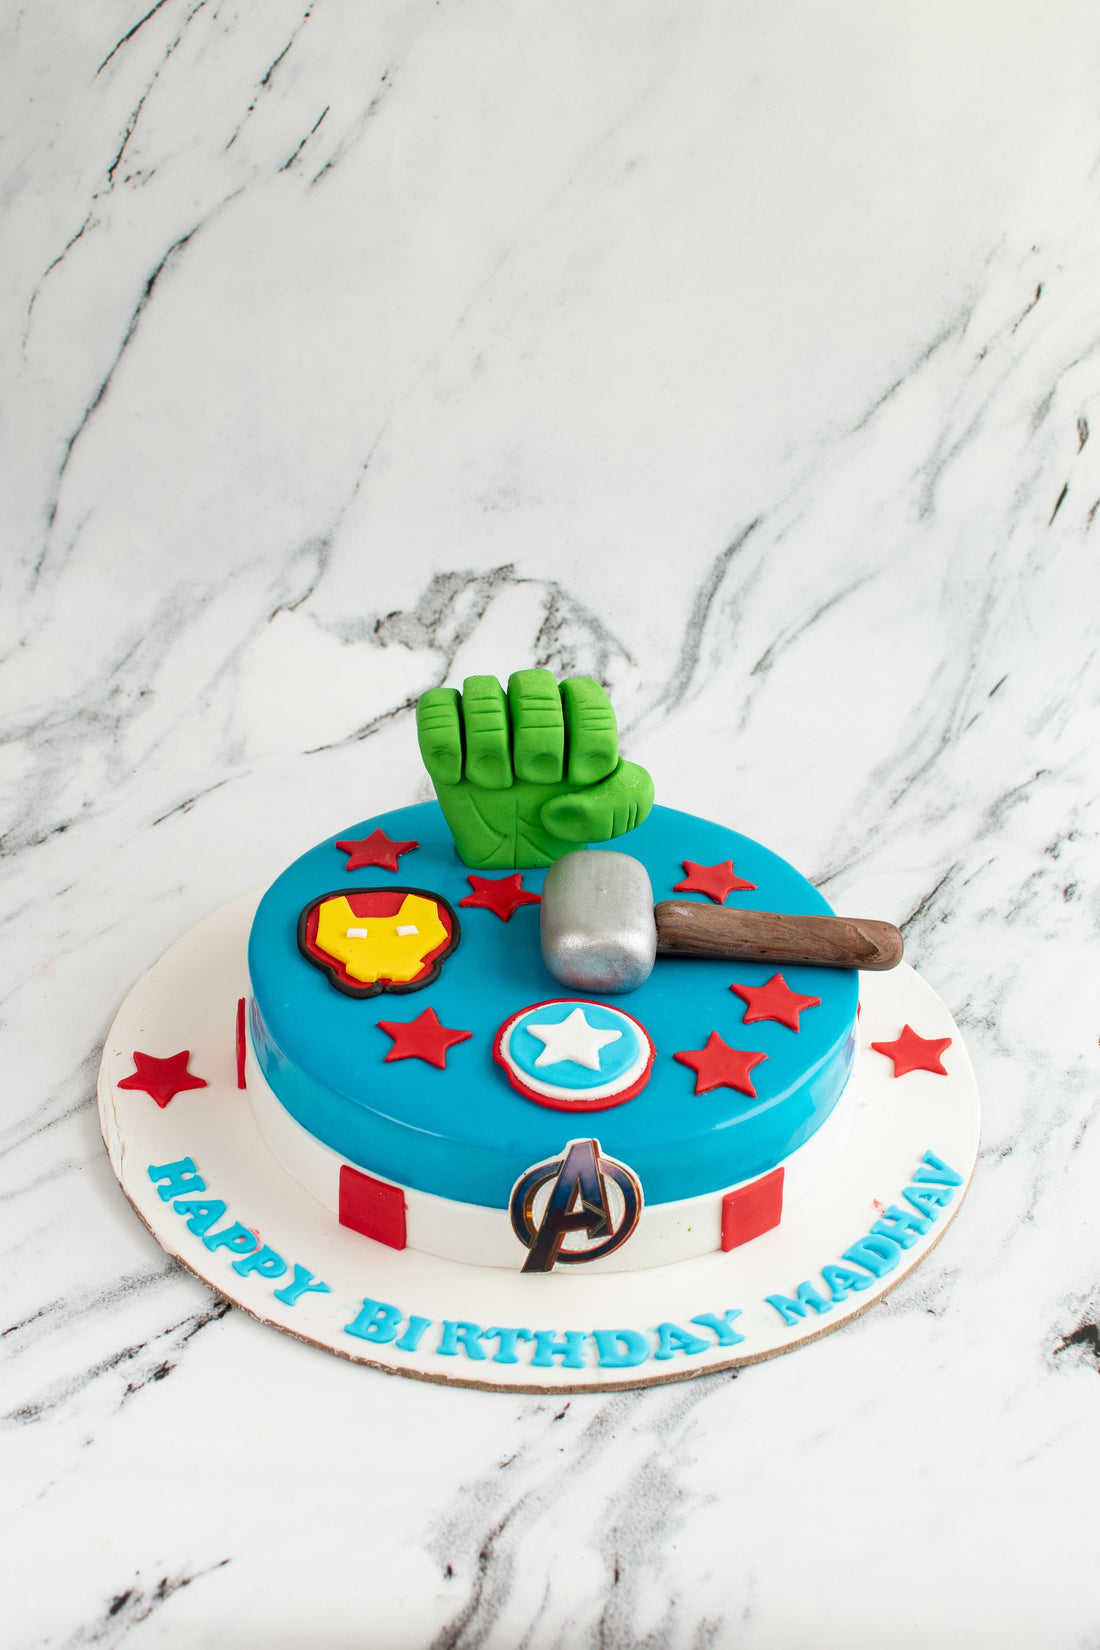 Avengers theme cake in blue color by Creme Castle